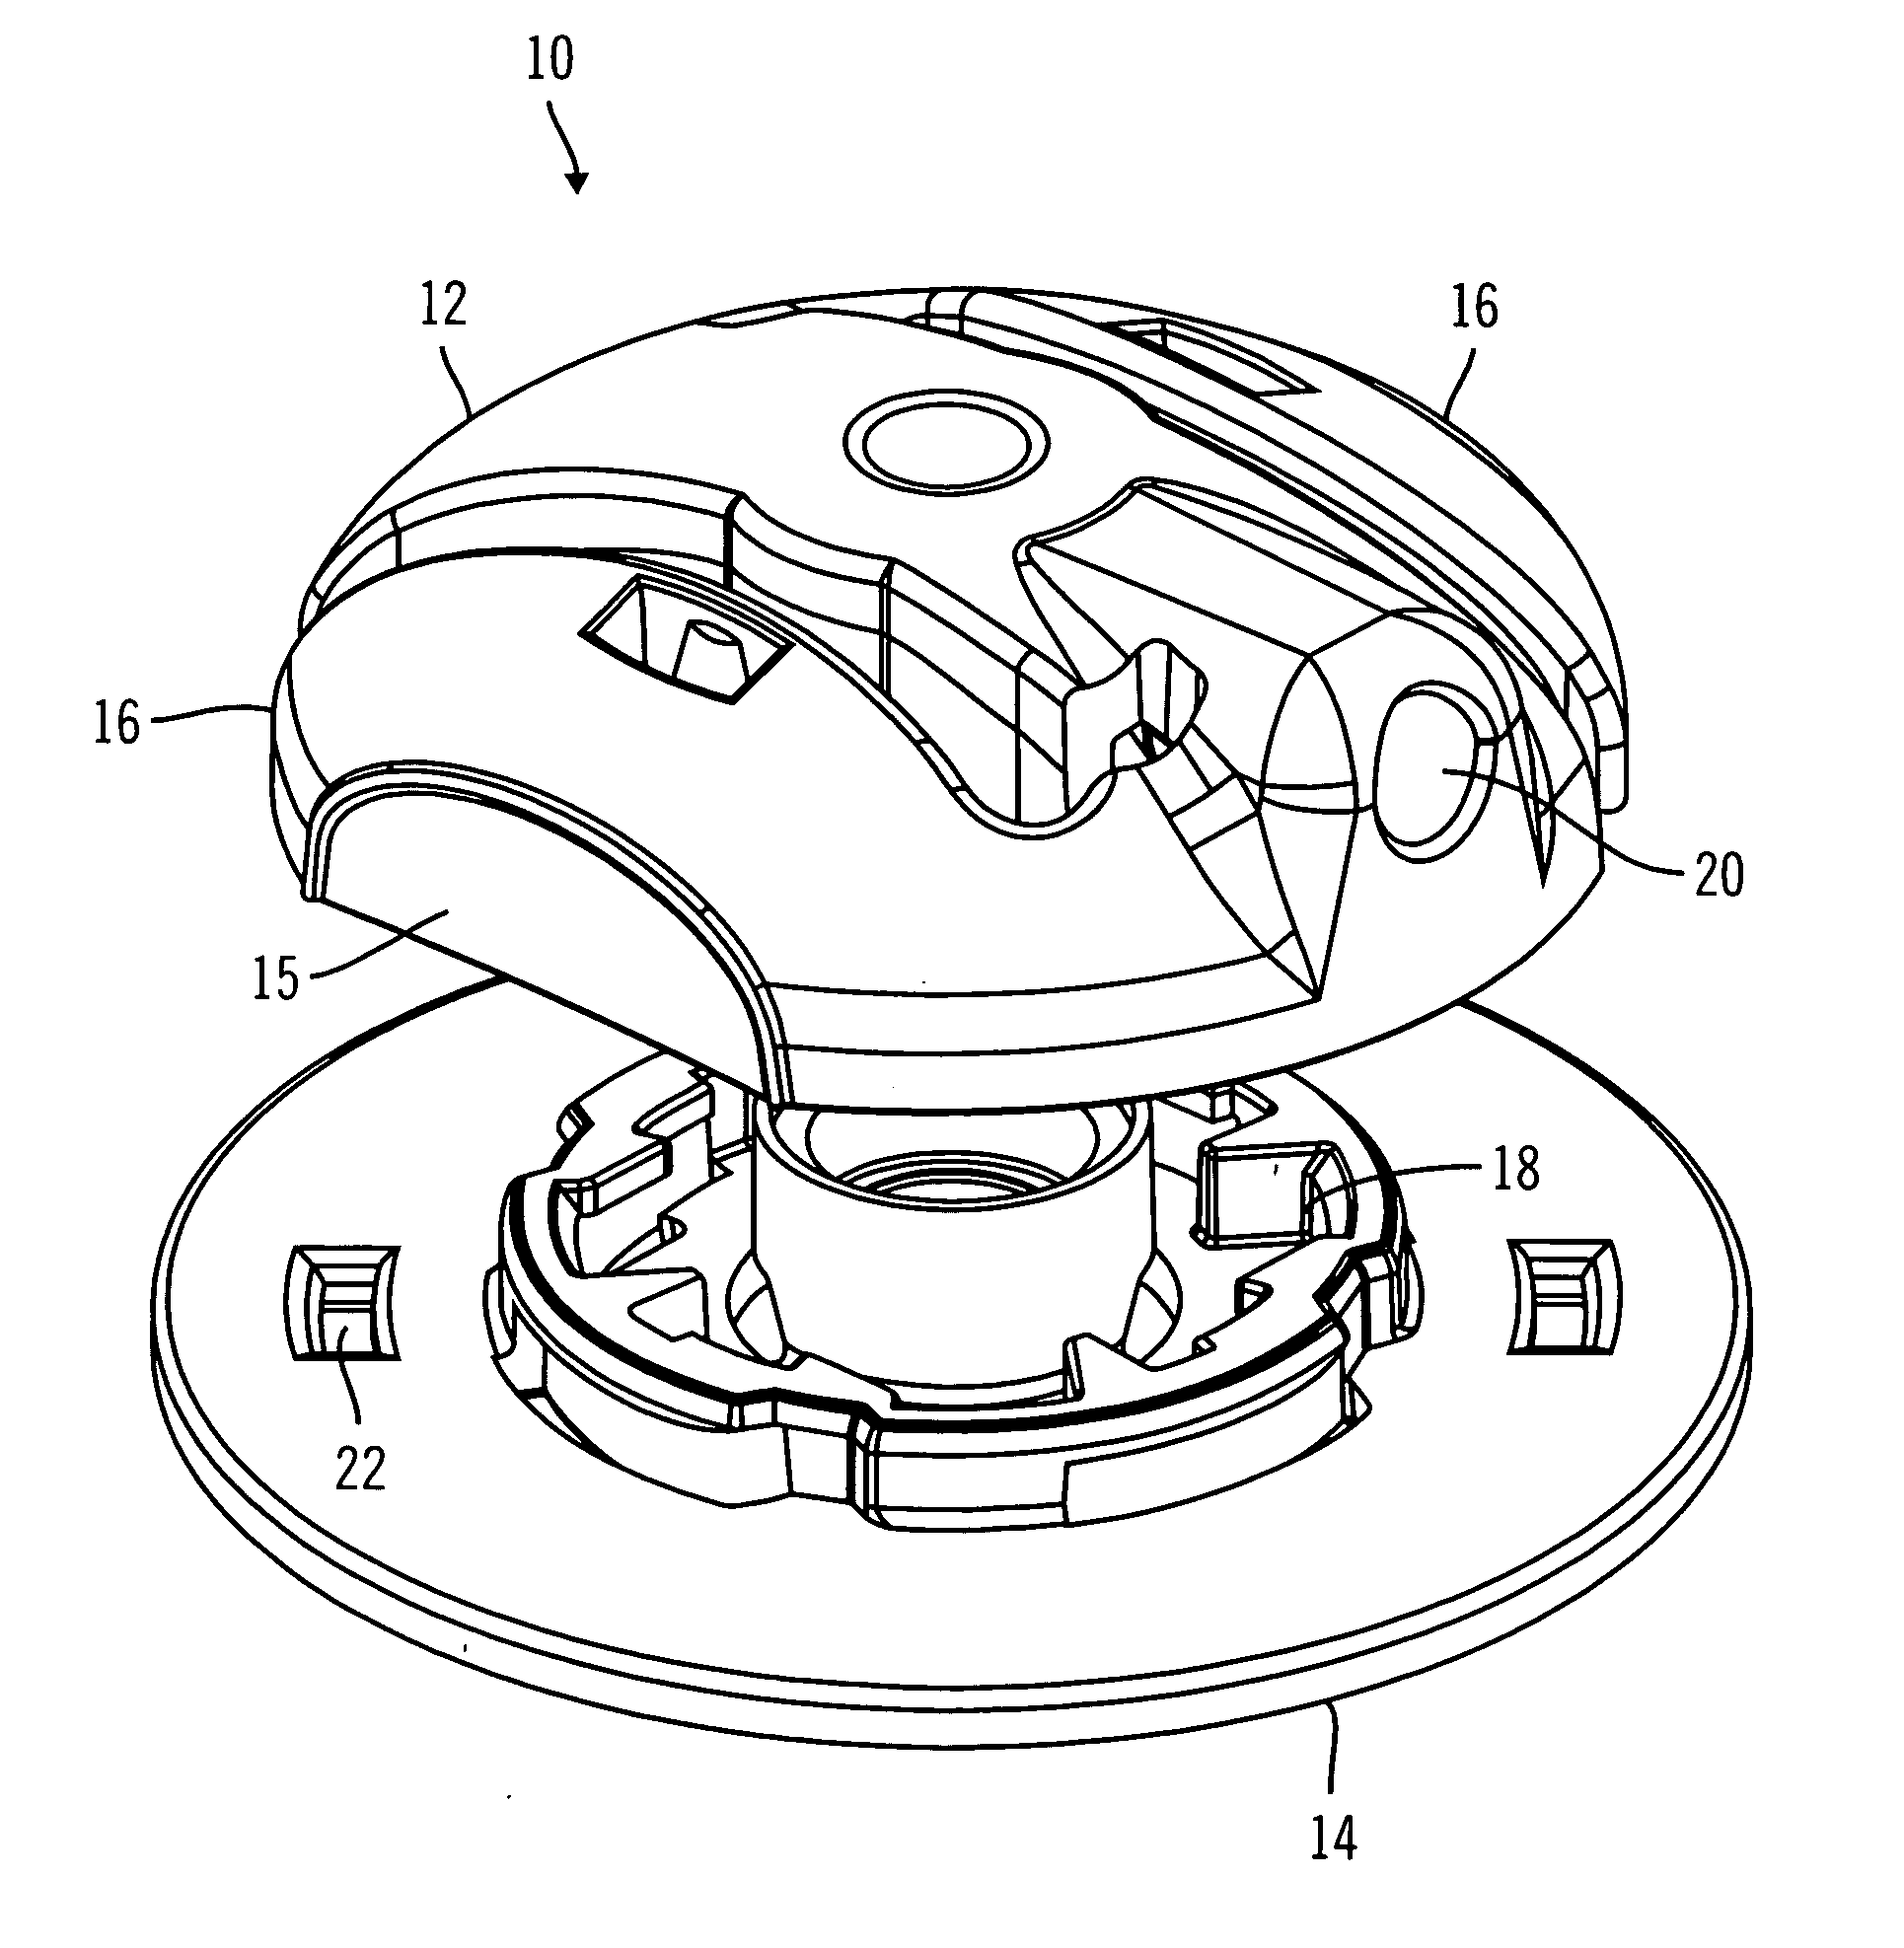 Multi-position infusion set device and process